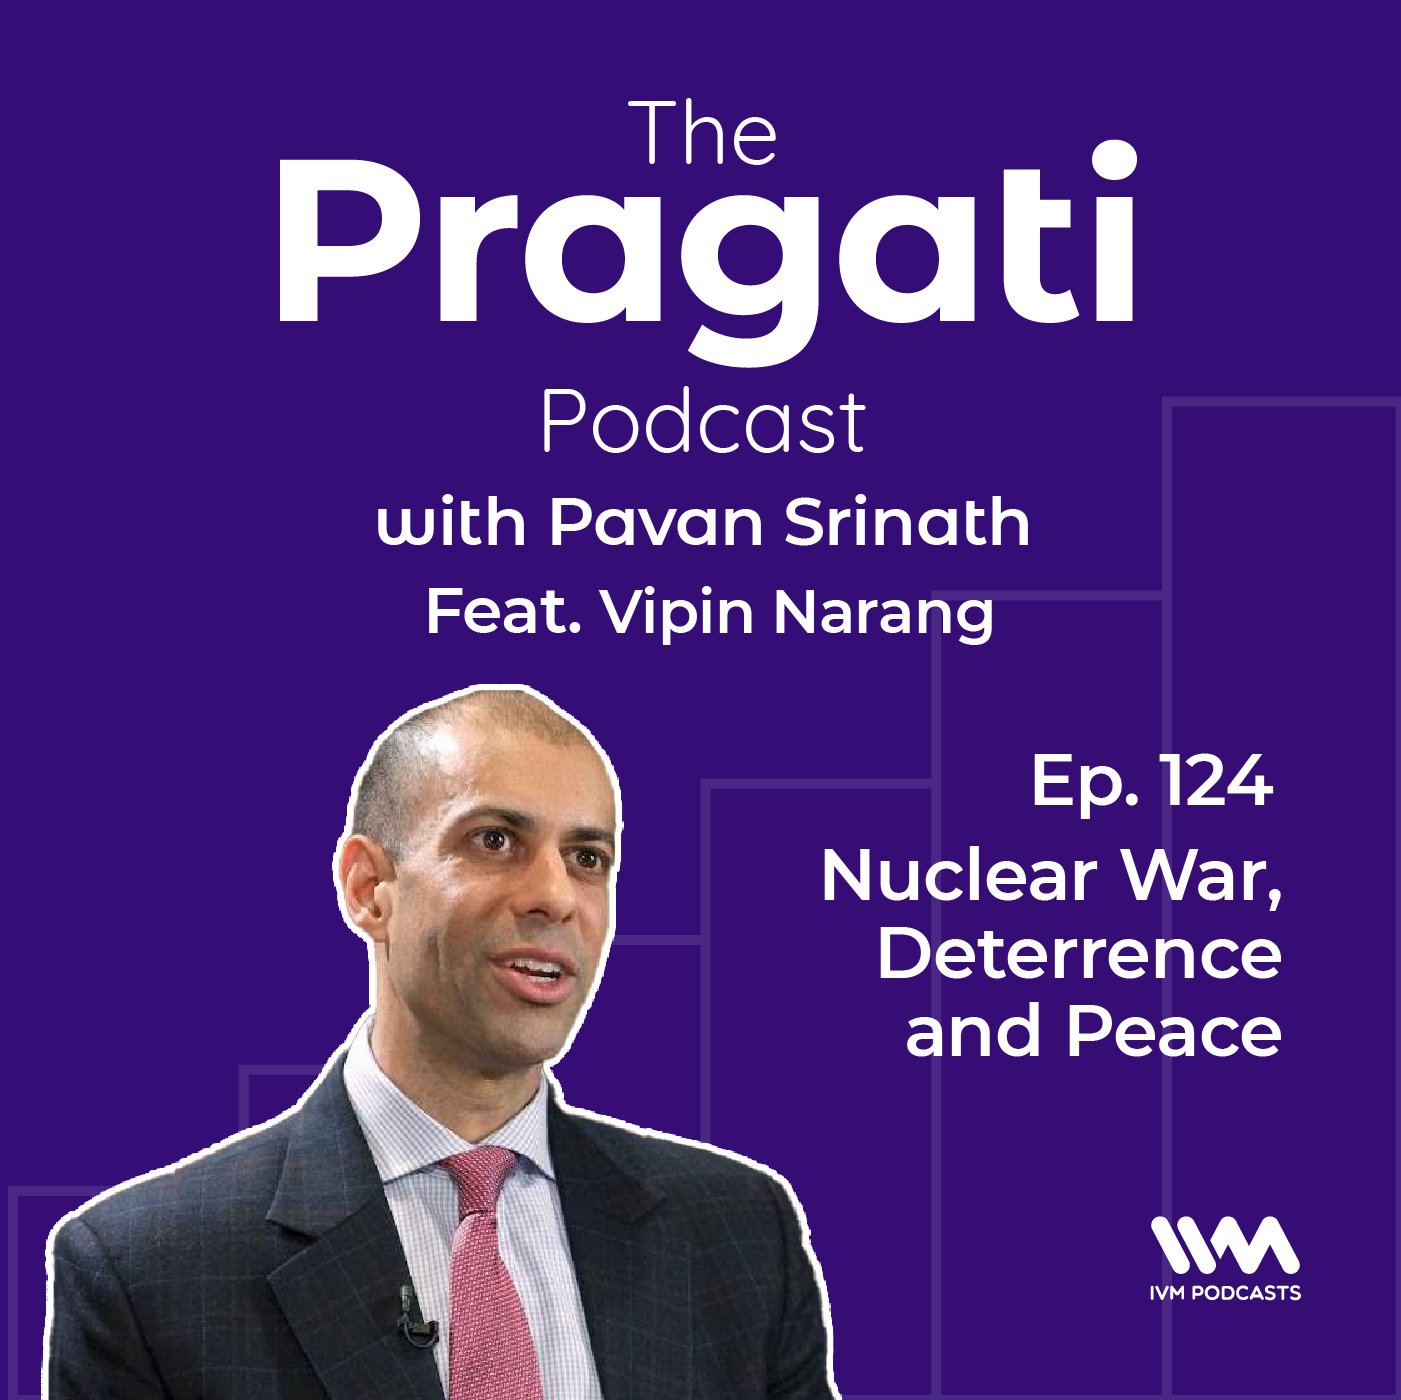 Ep. 124: Nuclear War, Deterrence and Peace.